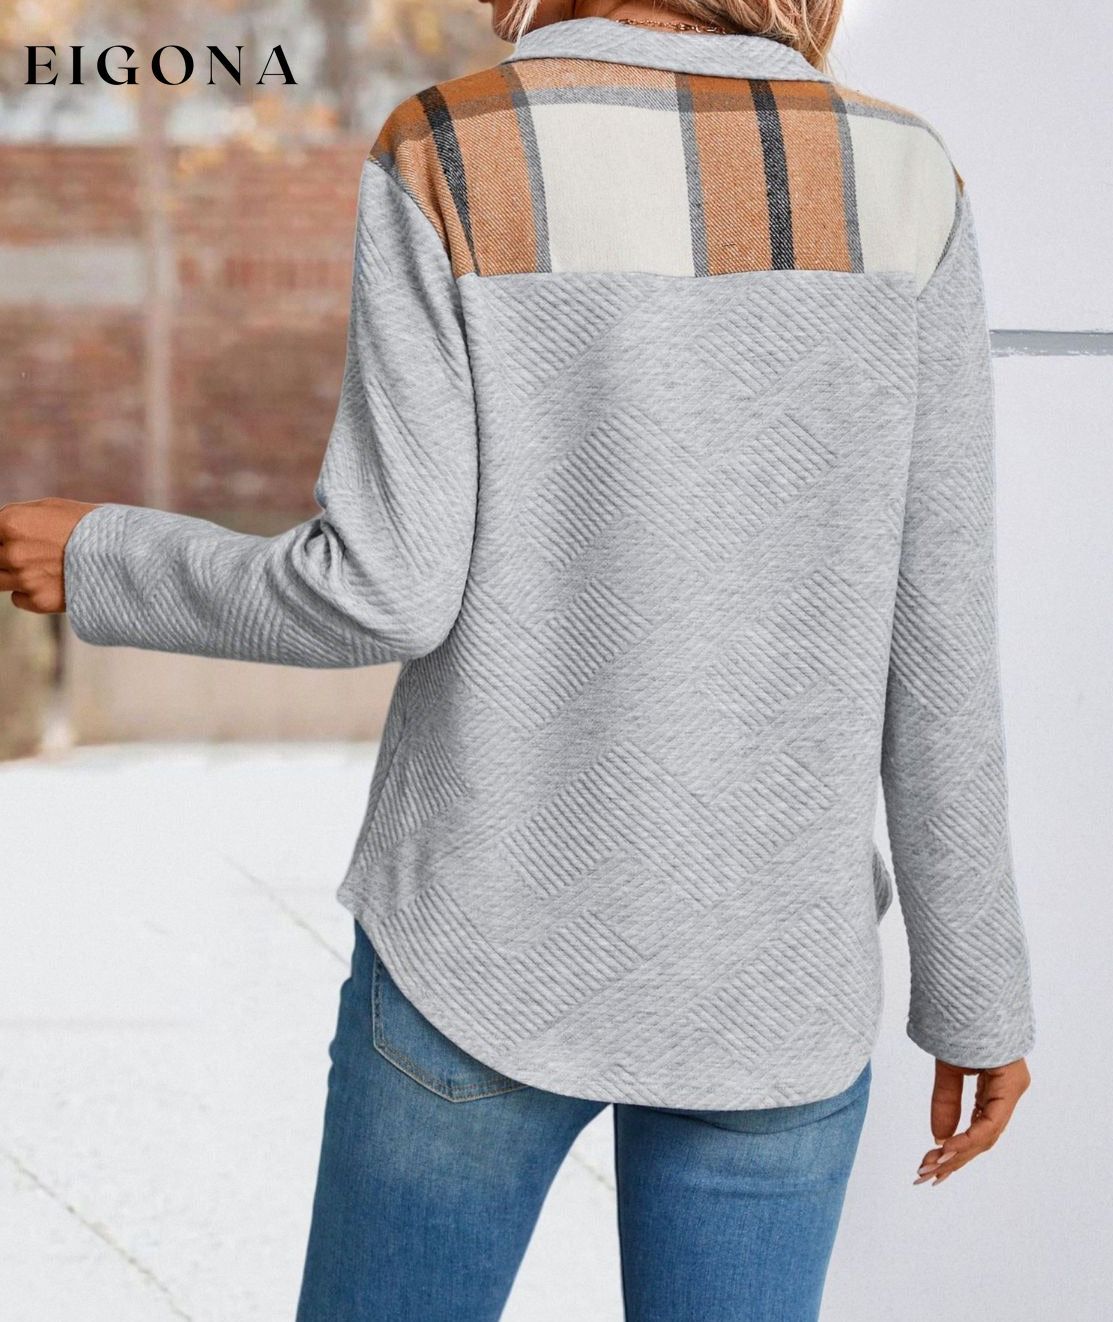 Double Take Spliced Plaid Quarter-Snap Mock Neck Top clothes Double Take long sleeve Ship From Overseas Sweater sweaters trend